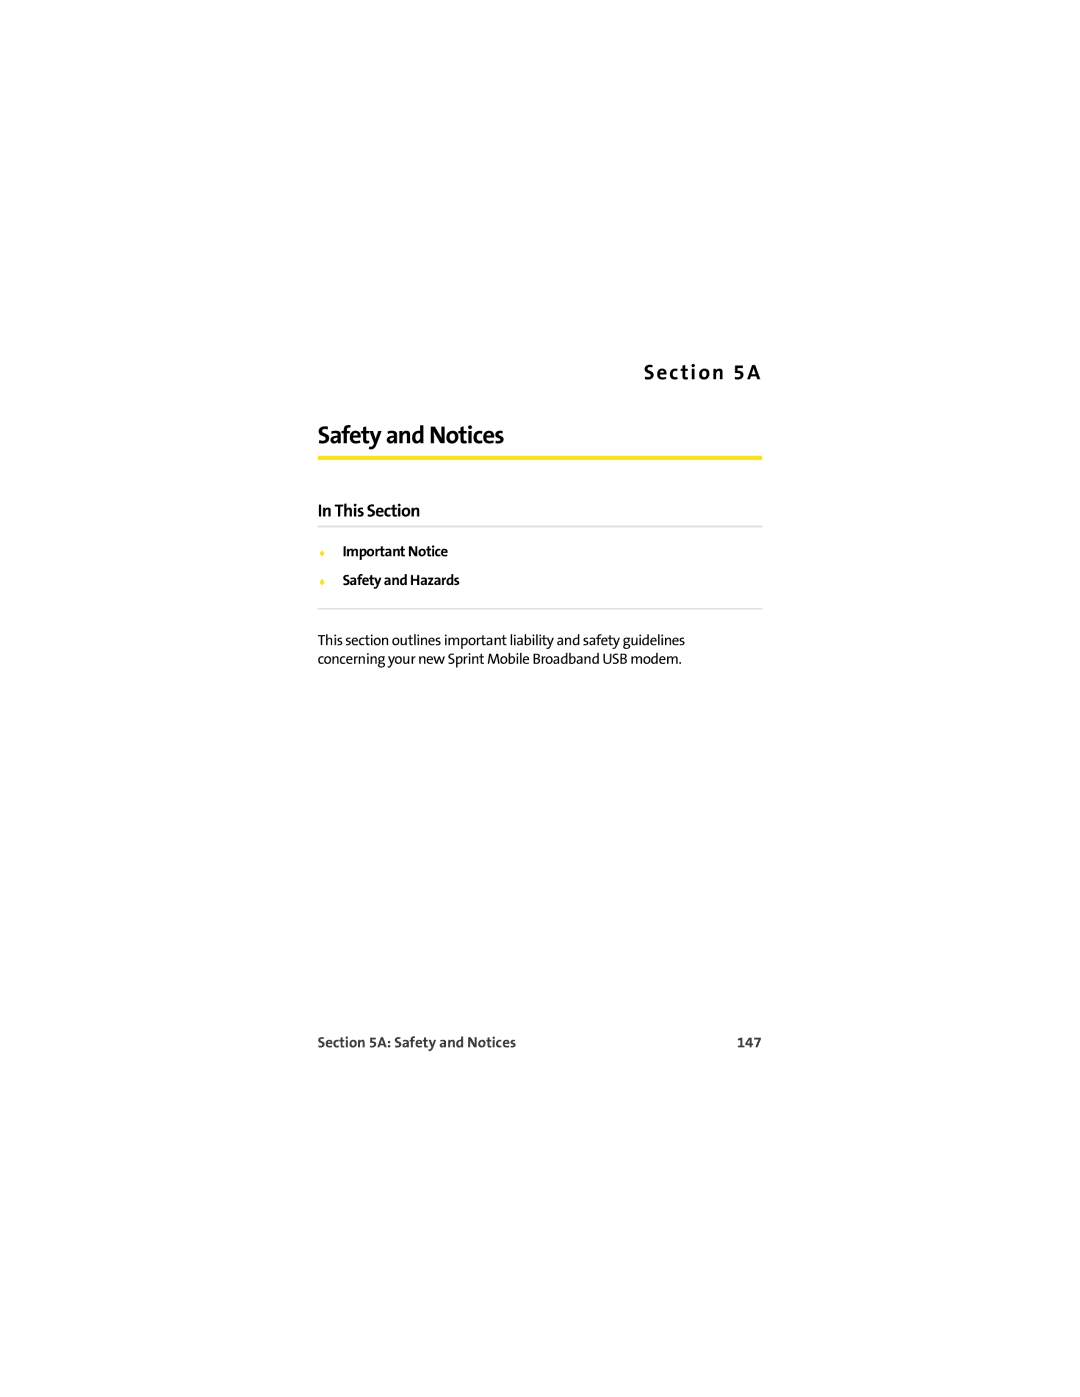 Sprint Nextel U727 manual Important Notice Safety and Hazards, Safety and Notices 147 